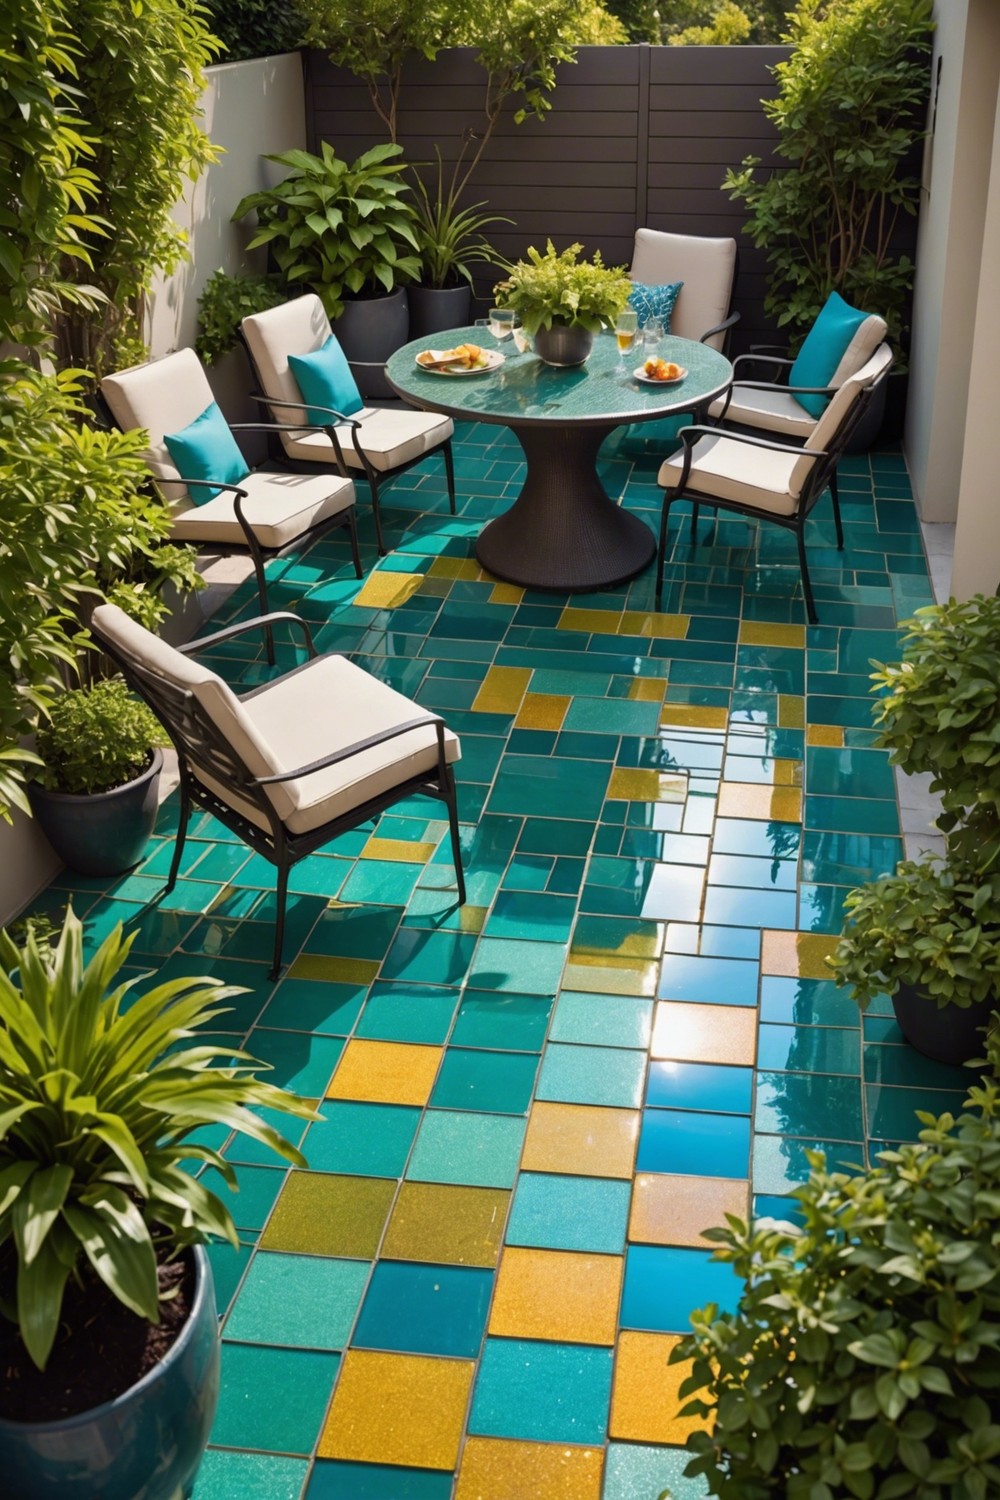 Glass Tiles for a Shimmering Patio